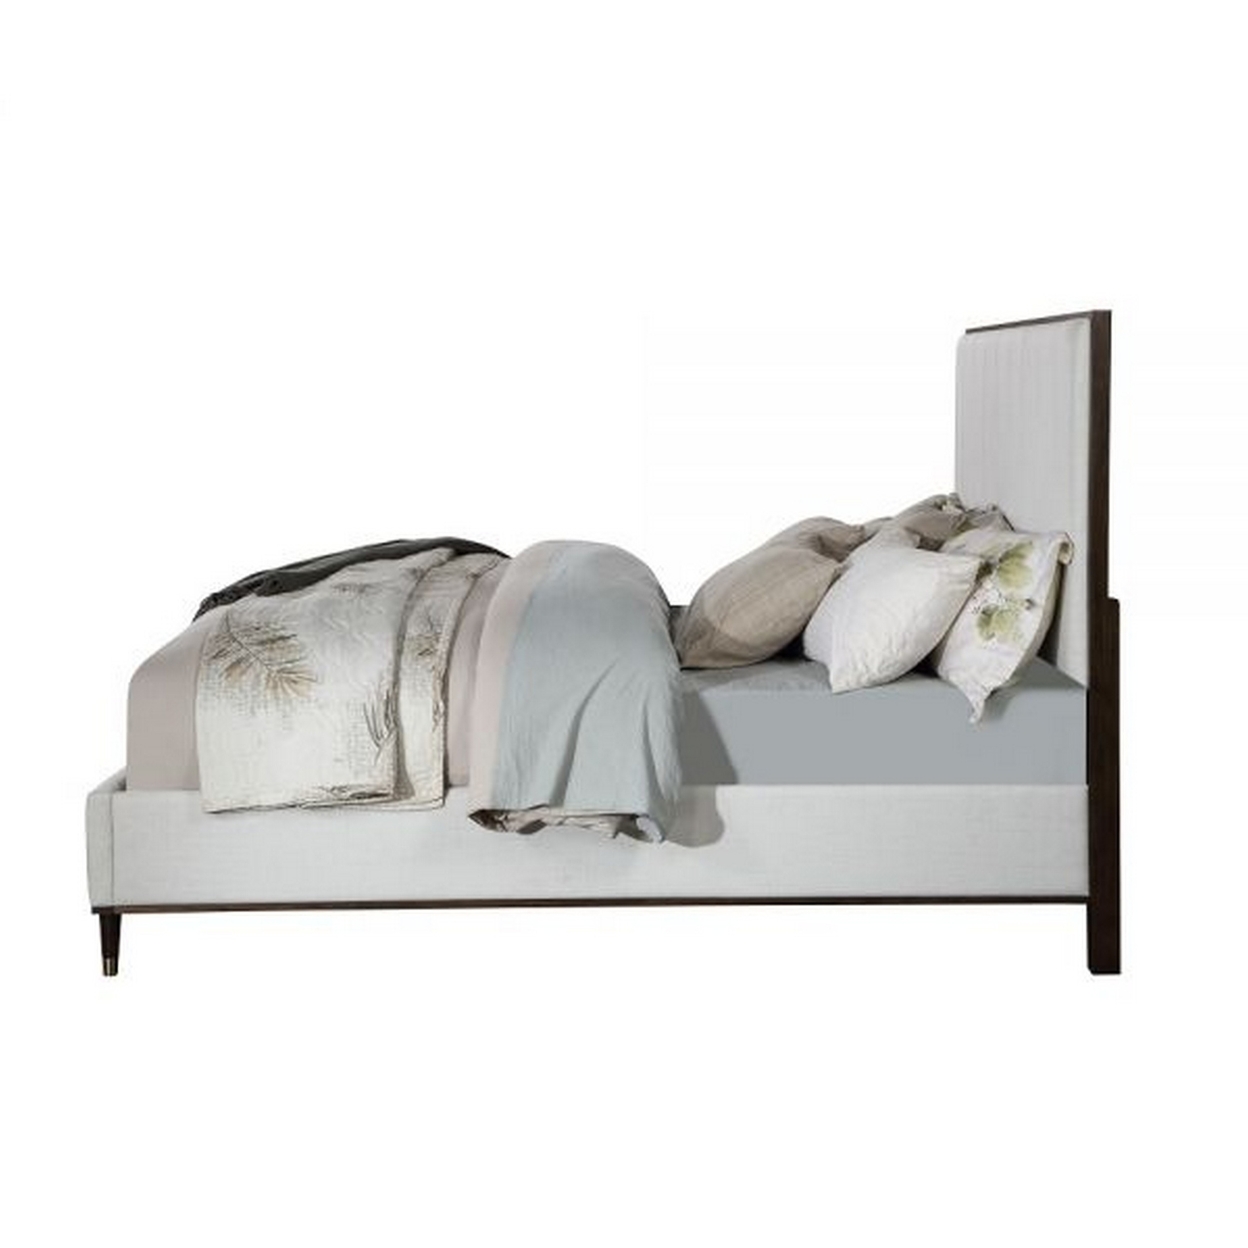 Aren Queen Bed, Light Gray Fabric Upholstery, Crisp White And Smooth Brown -Saltoro Sherpi